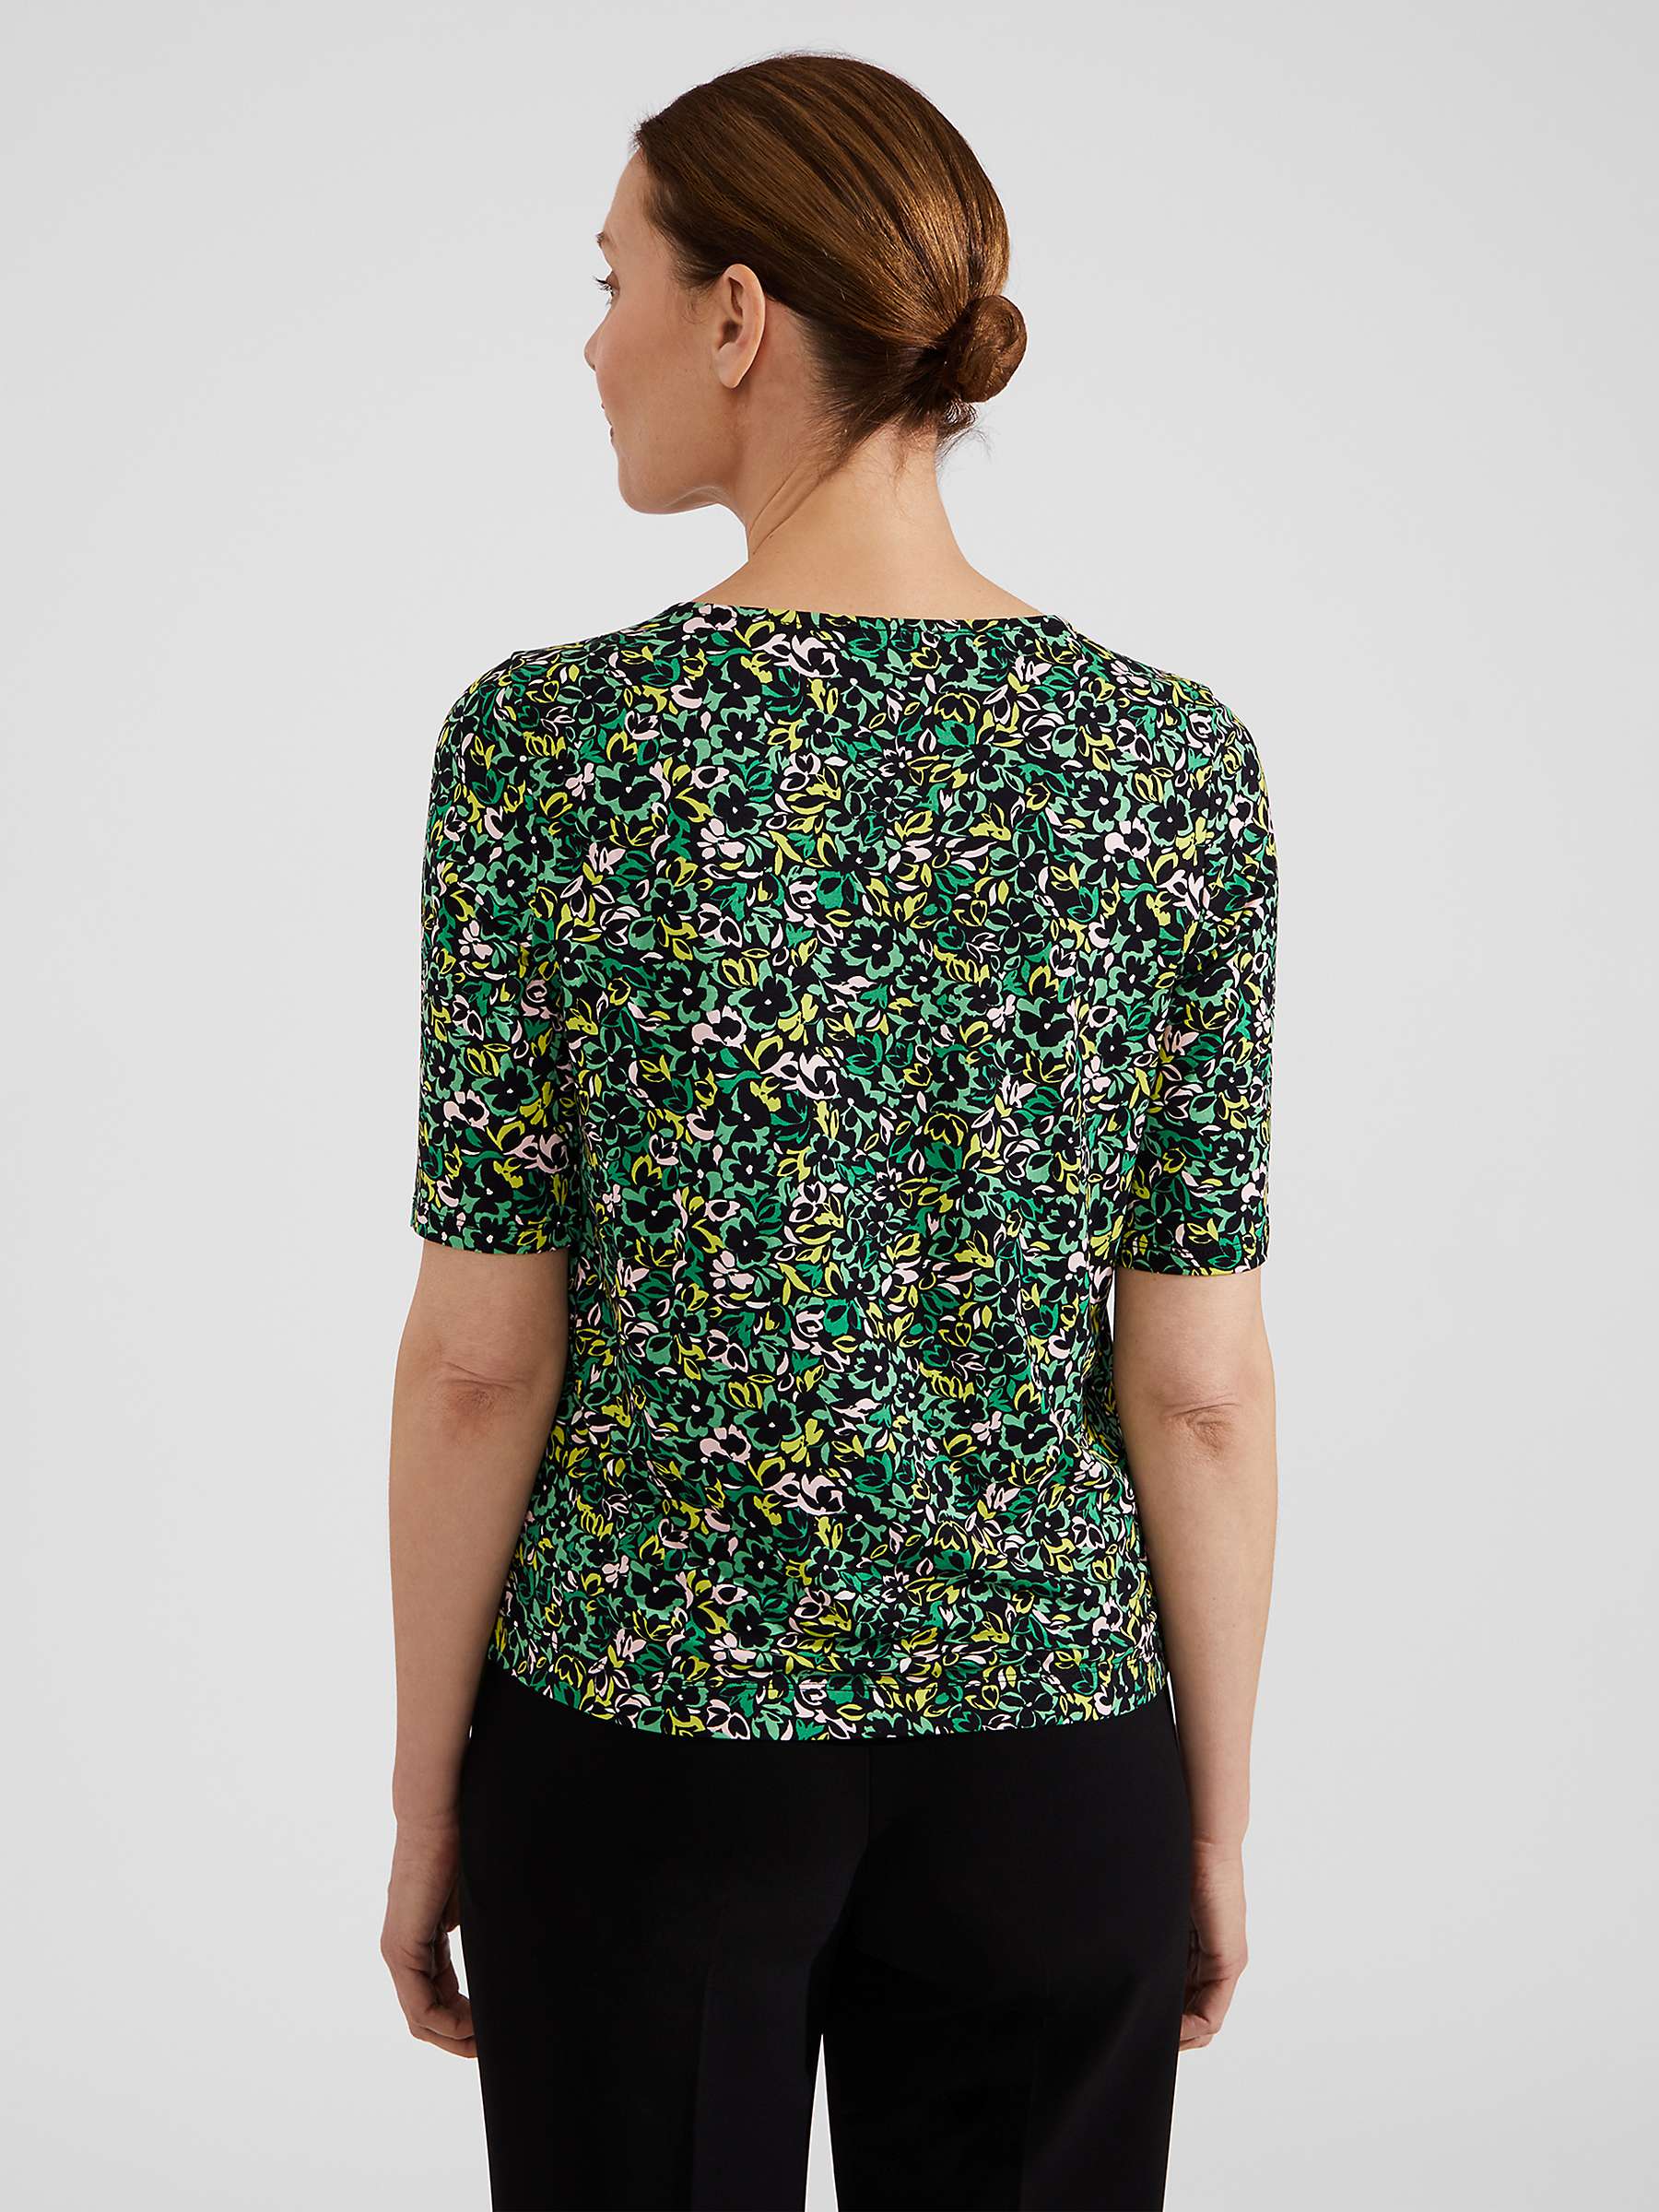 Buy Hobbs Jacqueline Abstract Print Top, Green/Multi Online at johnlewis.com